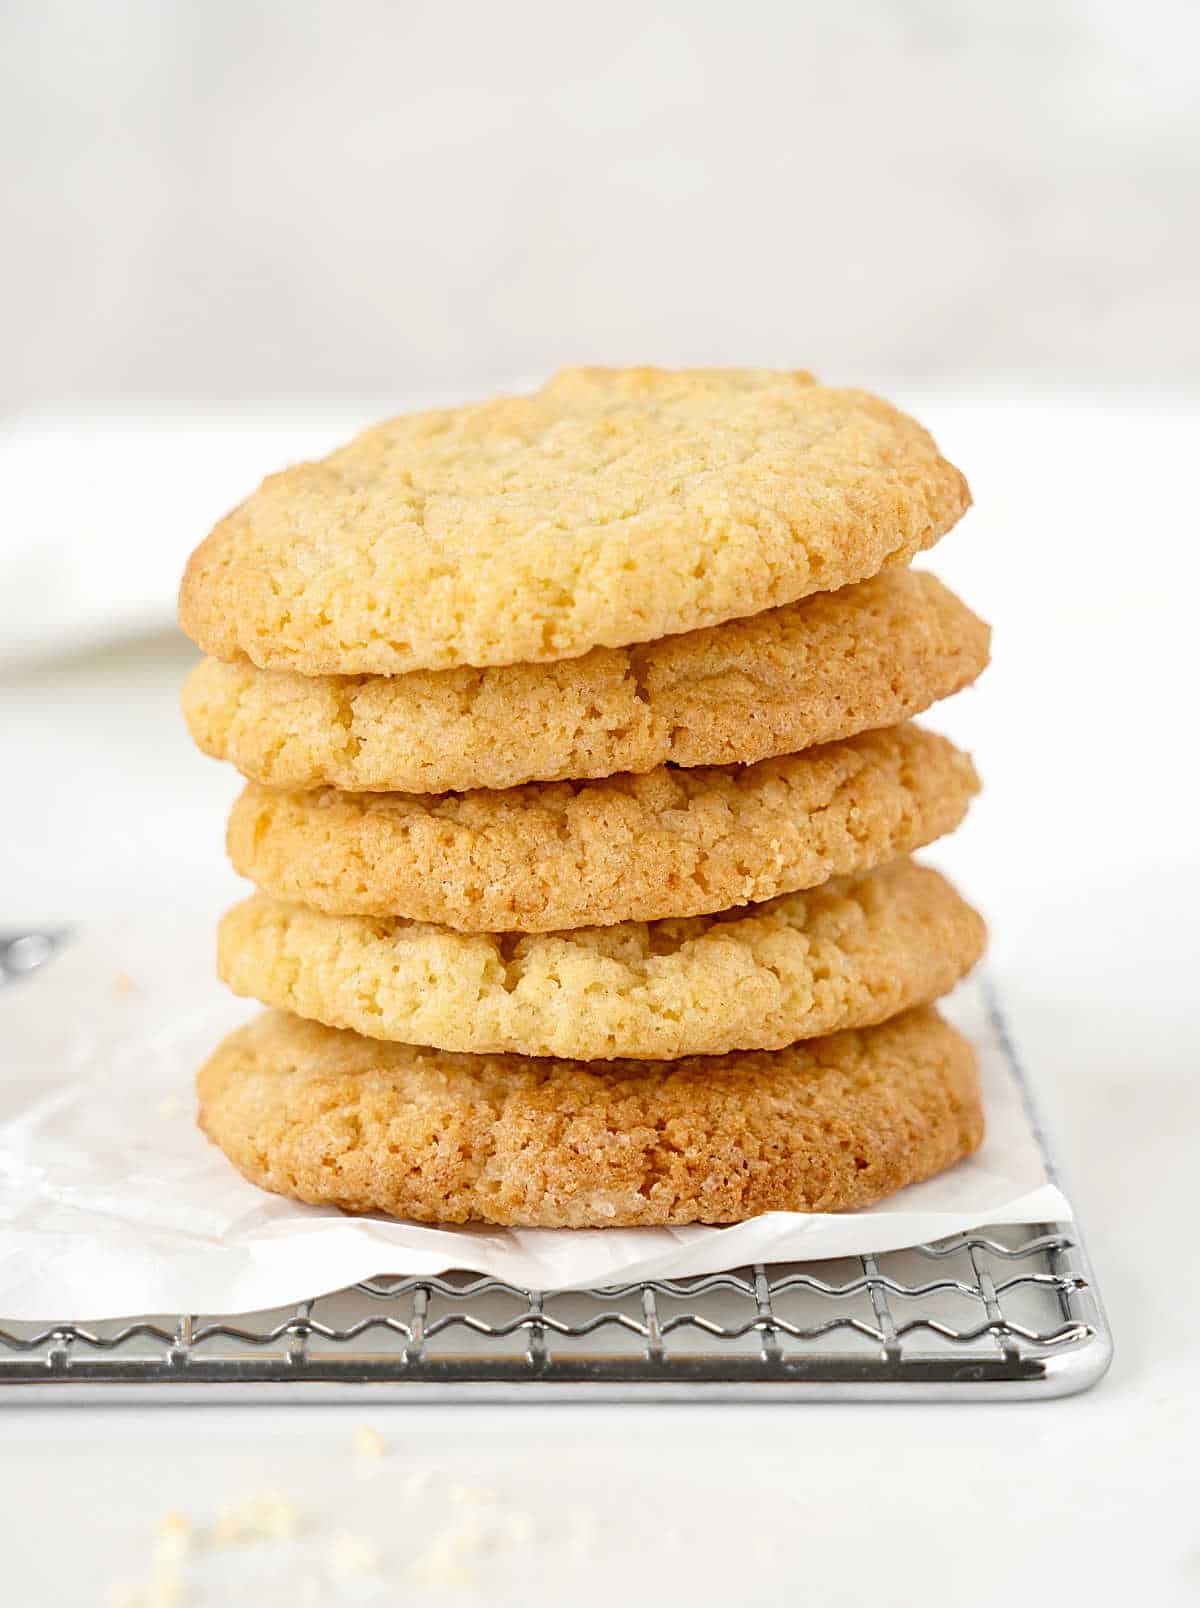 Vanilla cookies in a stack on white parchment paper on a wire rack. White surface and background.